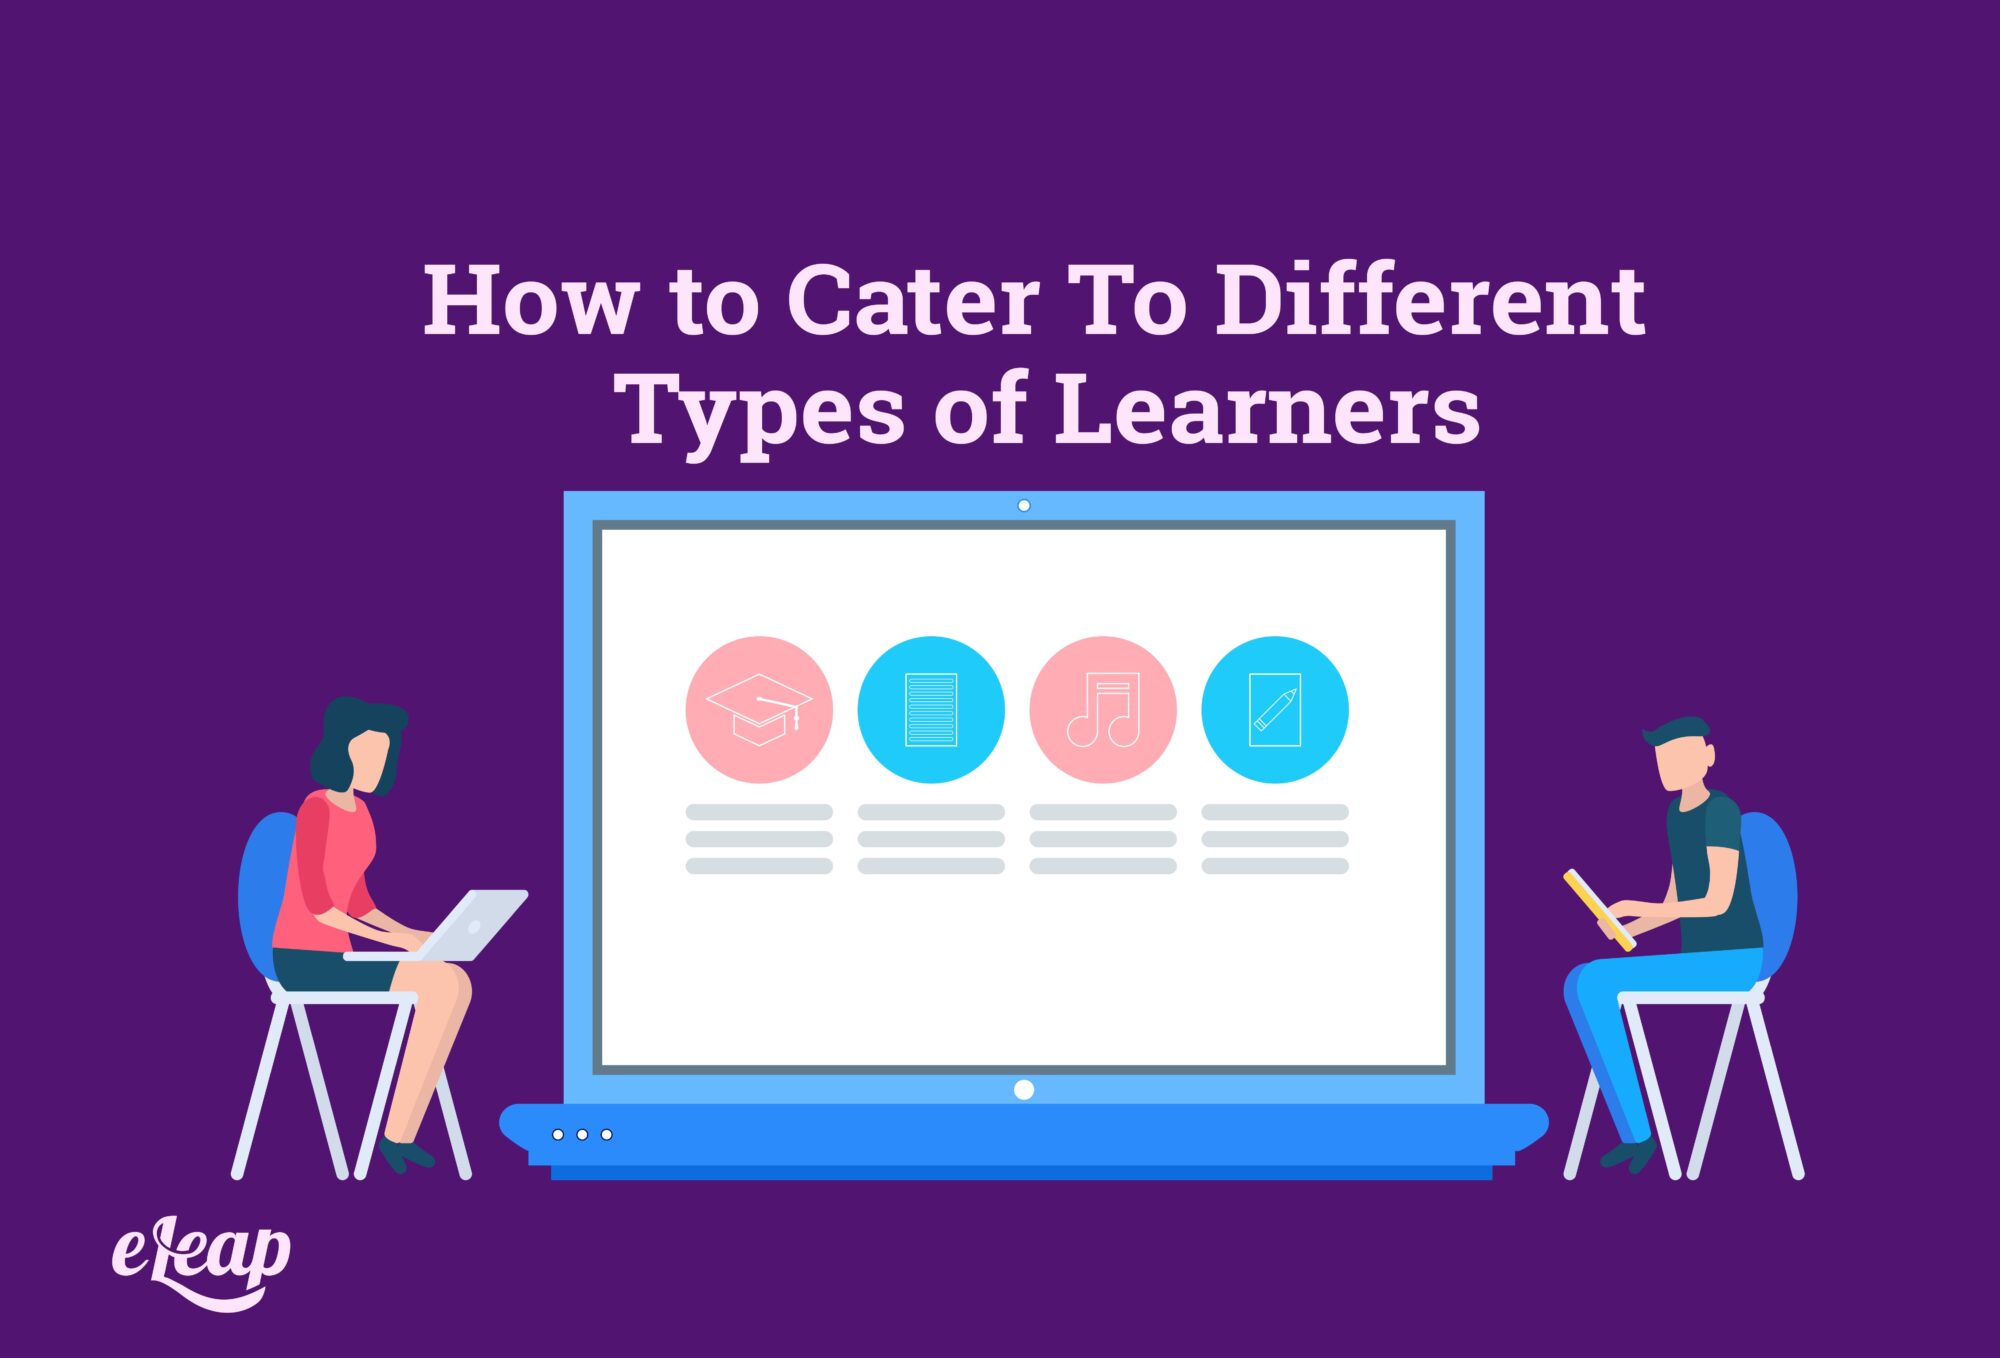 How to Cater To Different Types of Learners